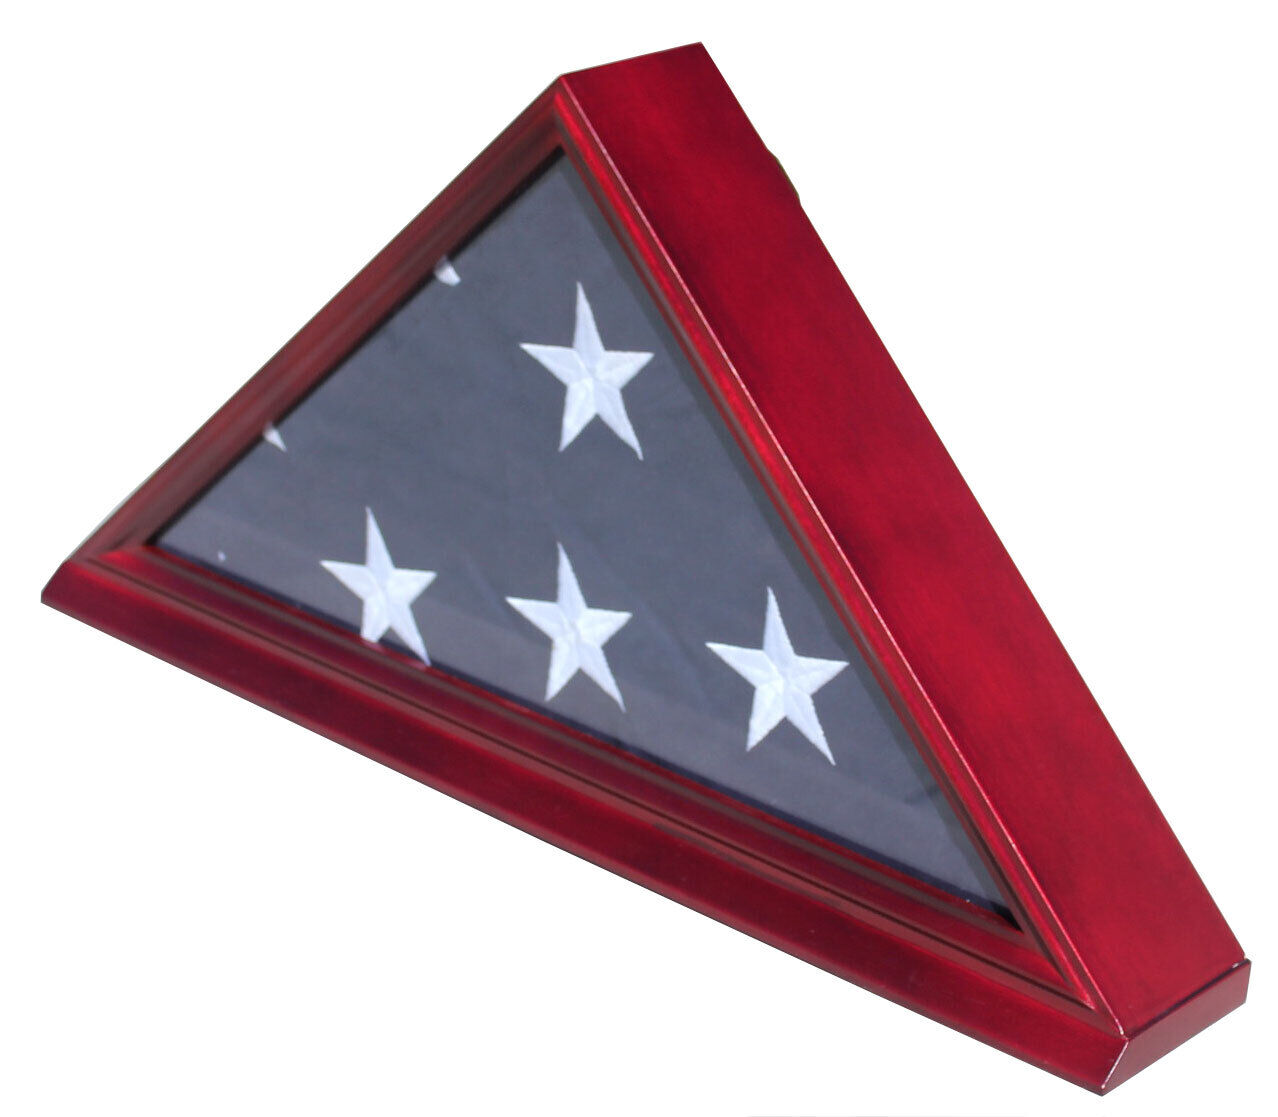 Burial/Memorial Flag Display Case for 5'X9.5' Folded, Solid wood, Real Glass